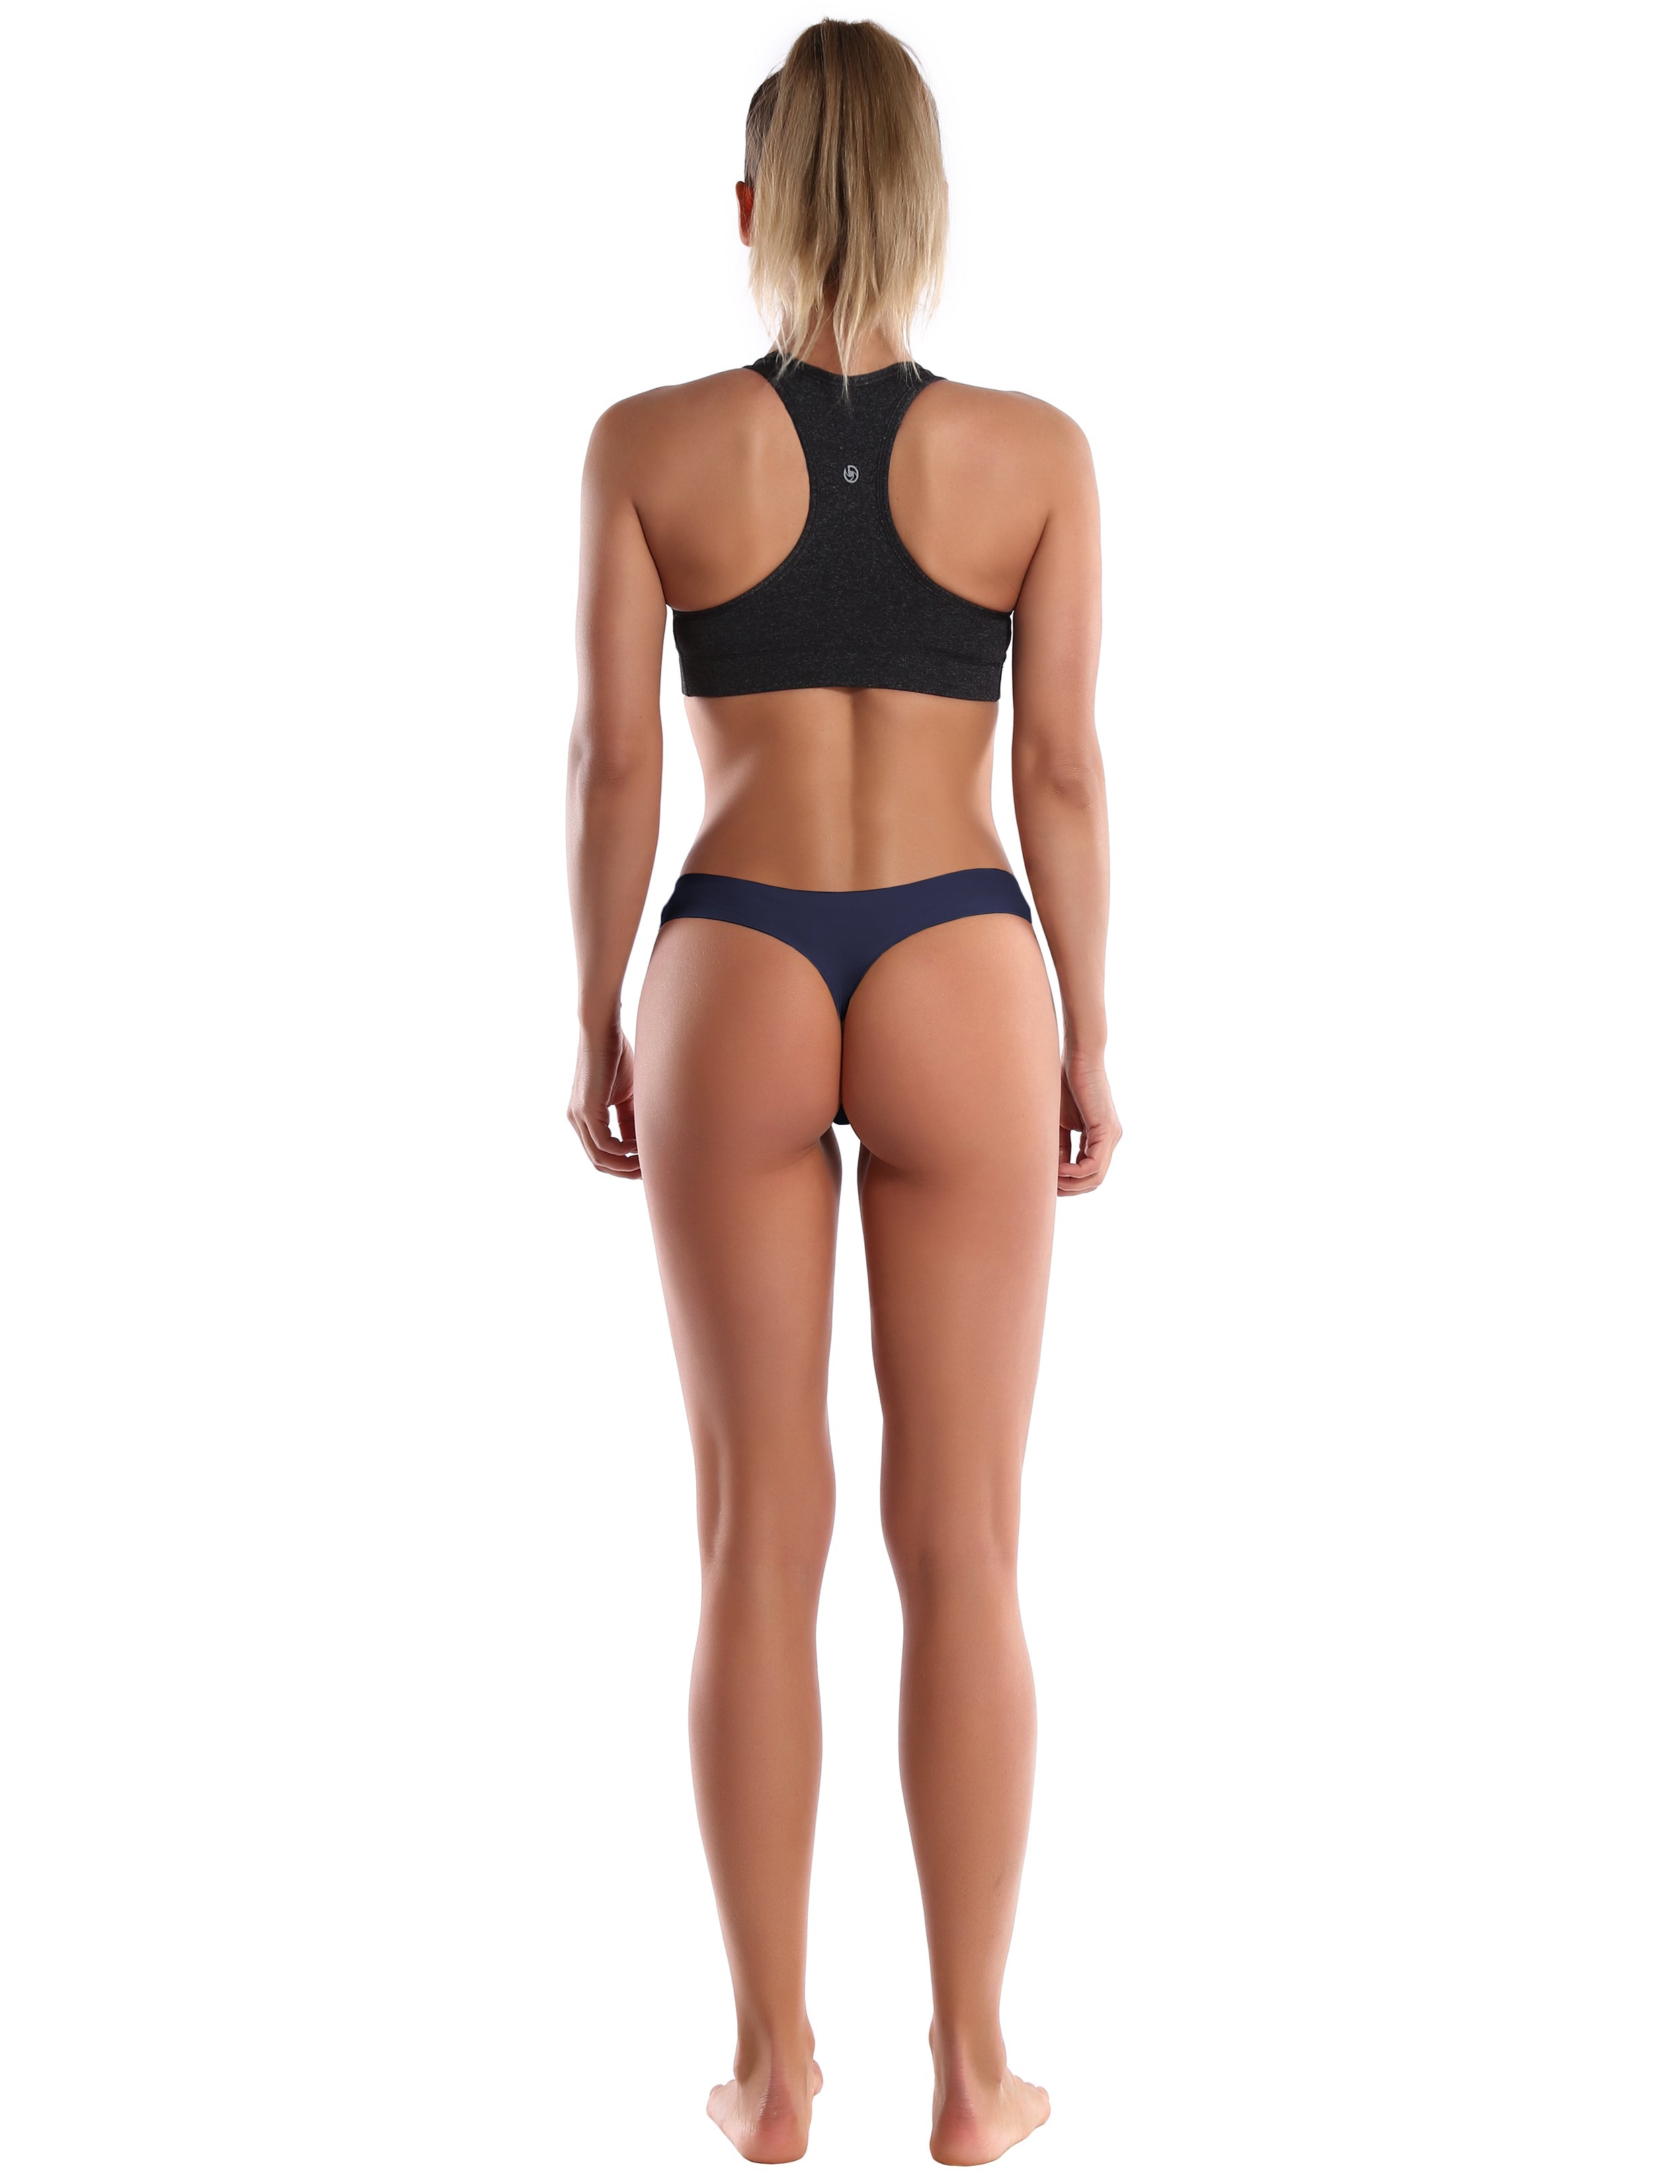 Invisibles Sport Thongs Darknavy Sleek, soft, smooth and totally comfortable: our newest thongs style is here. High elasticity High density Softest-ever fabric Laser cutting Unsealed Comfortable No panty lines Machine wash 95% Nylon, 5% Spandex